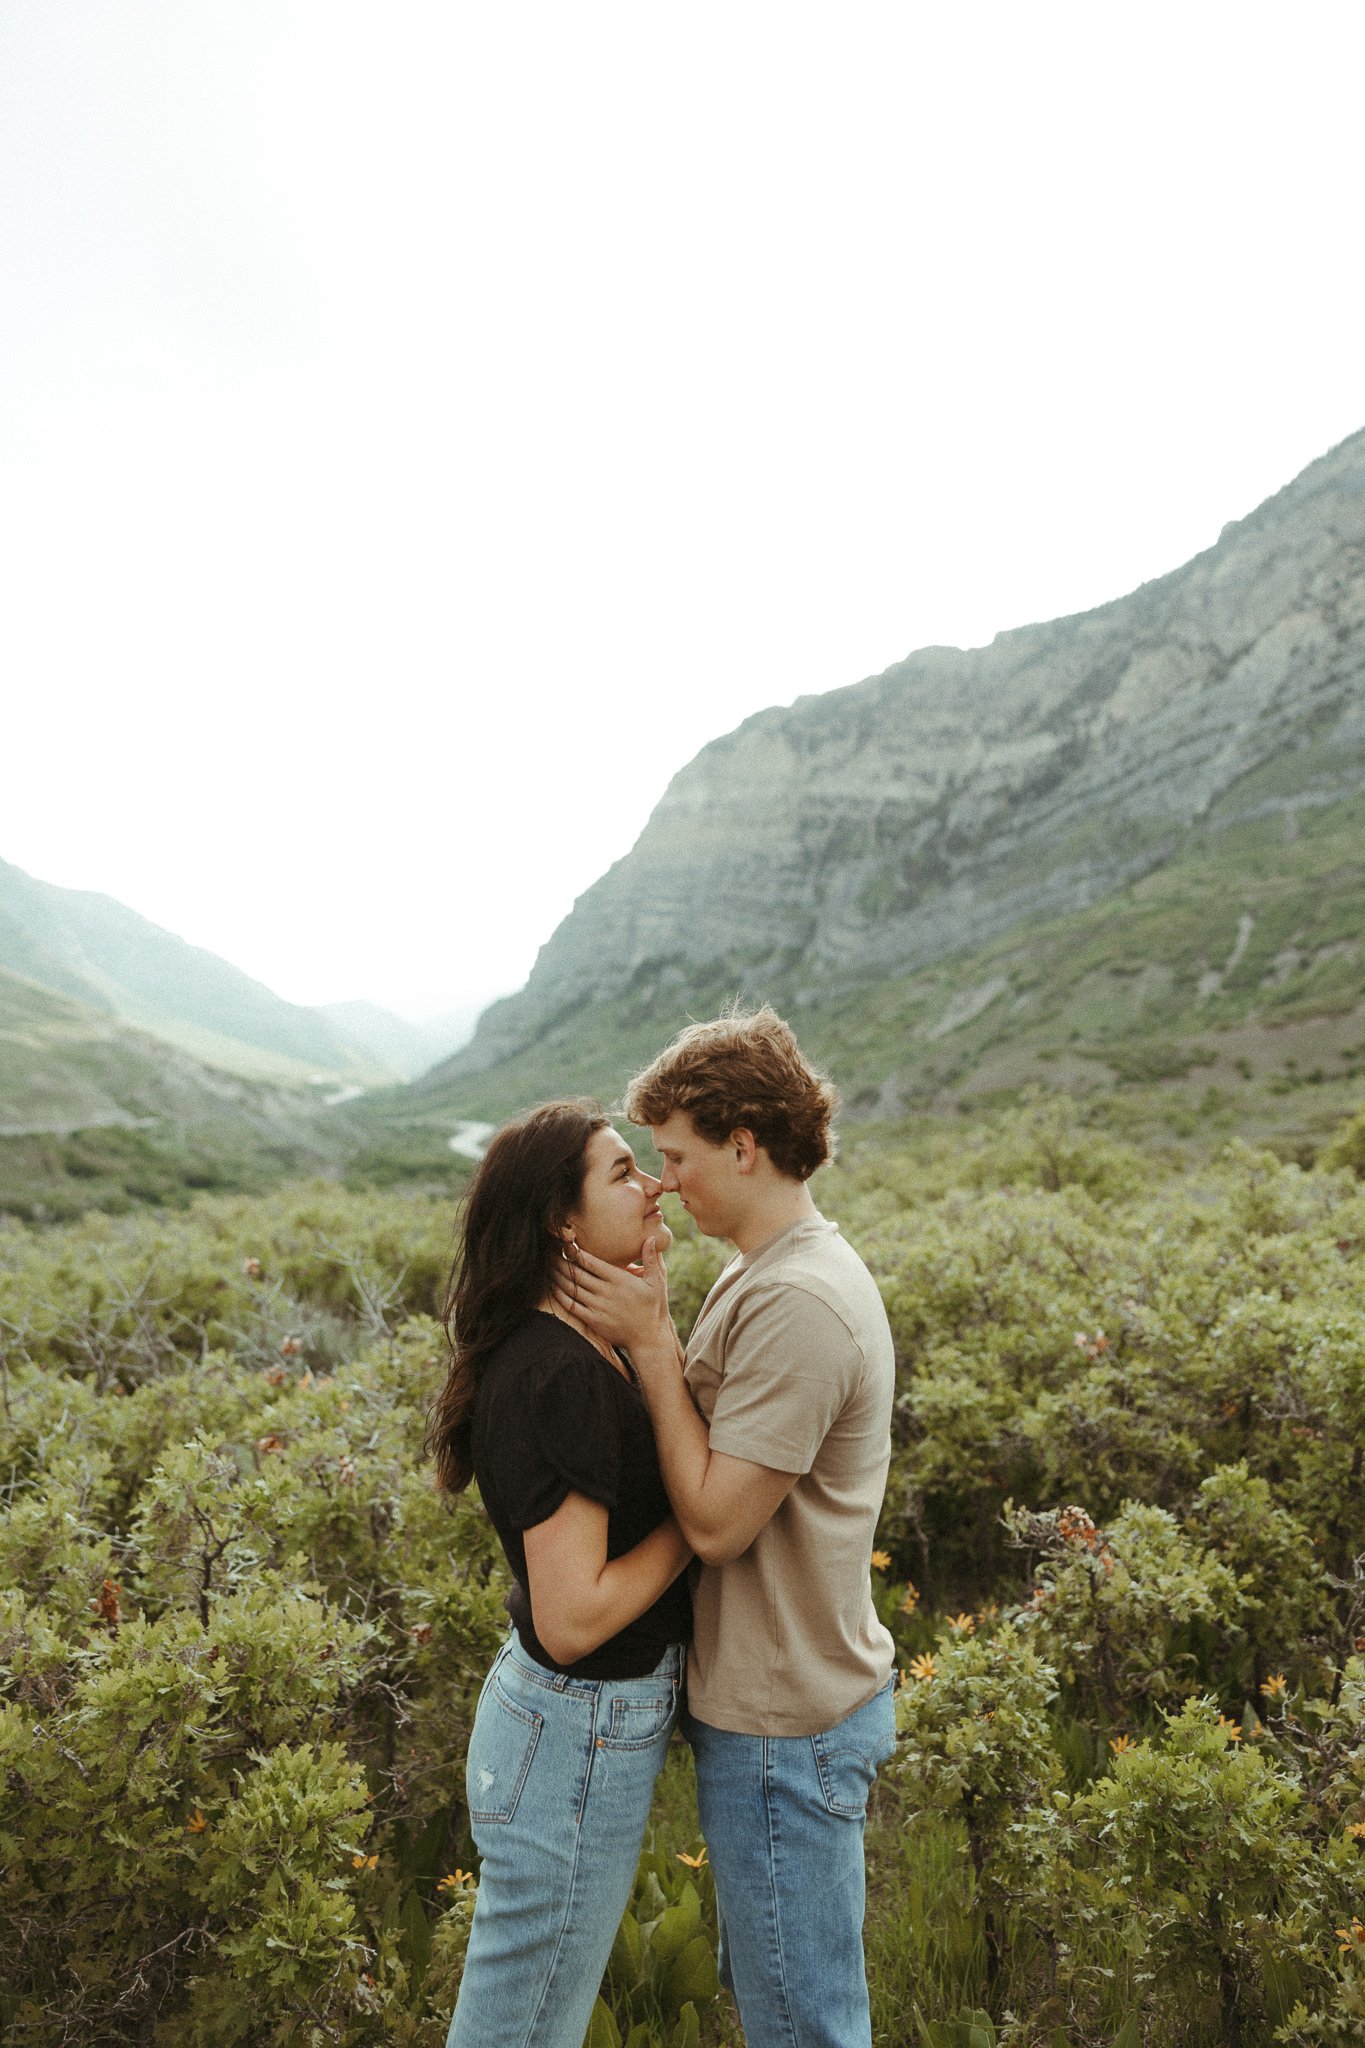 Spring-Provo-Canyon-Wildflowers-Engagement-Session-51